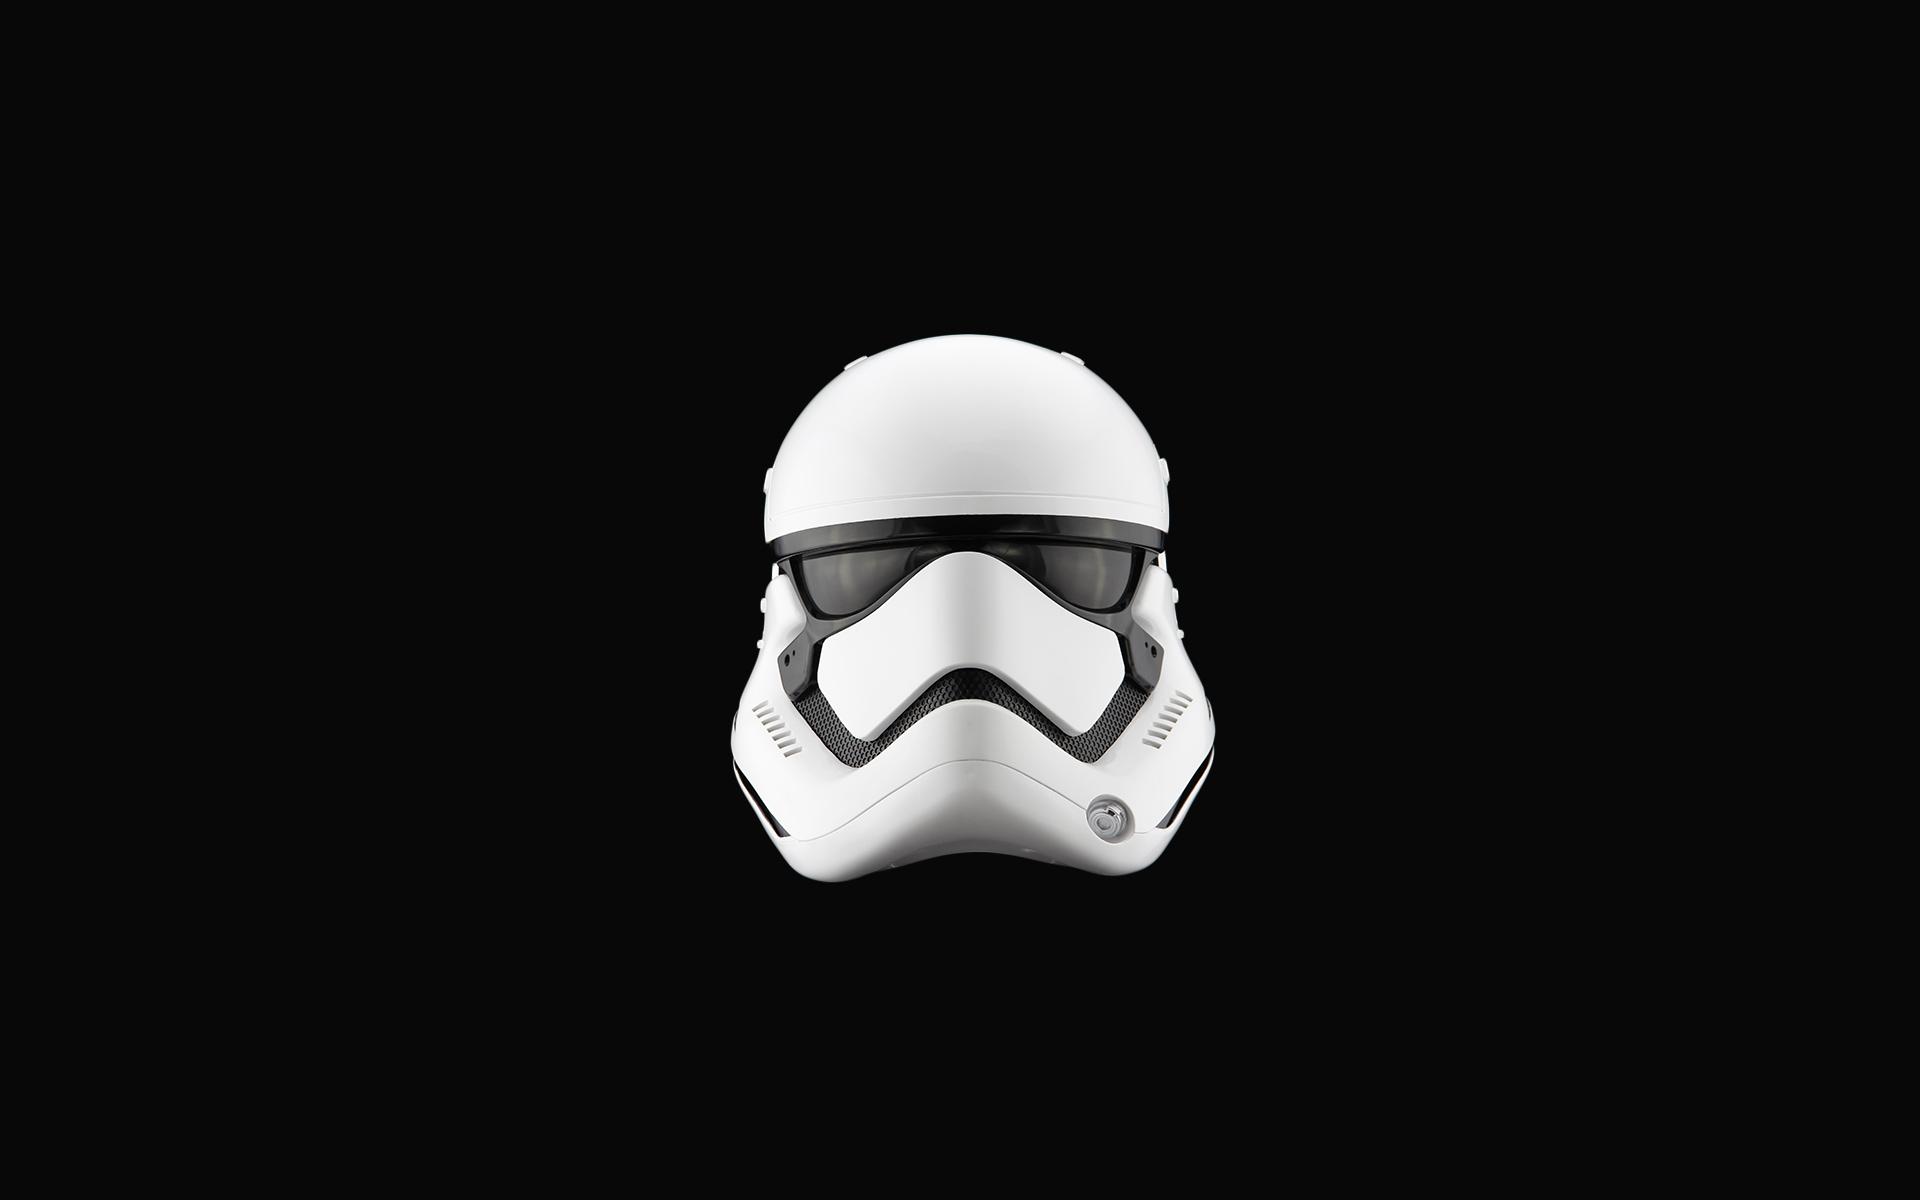 the Anovos stromtrooper makes a cool wallpaper